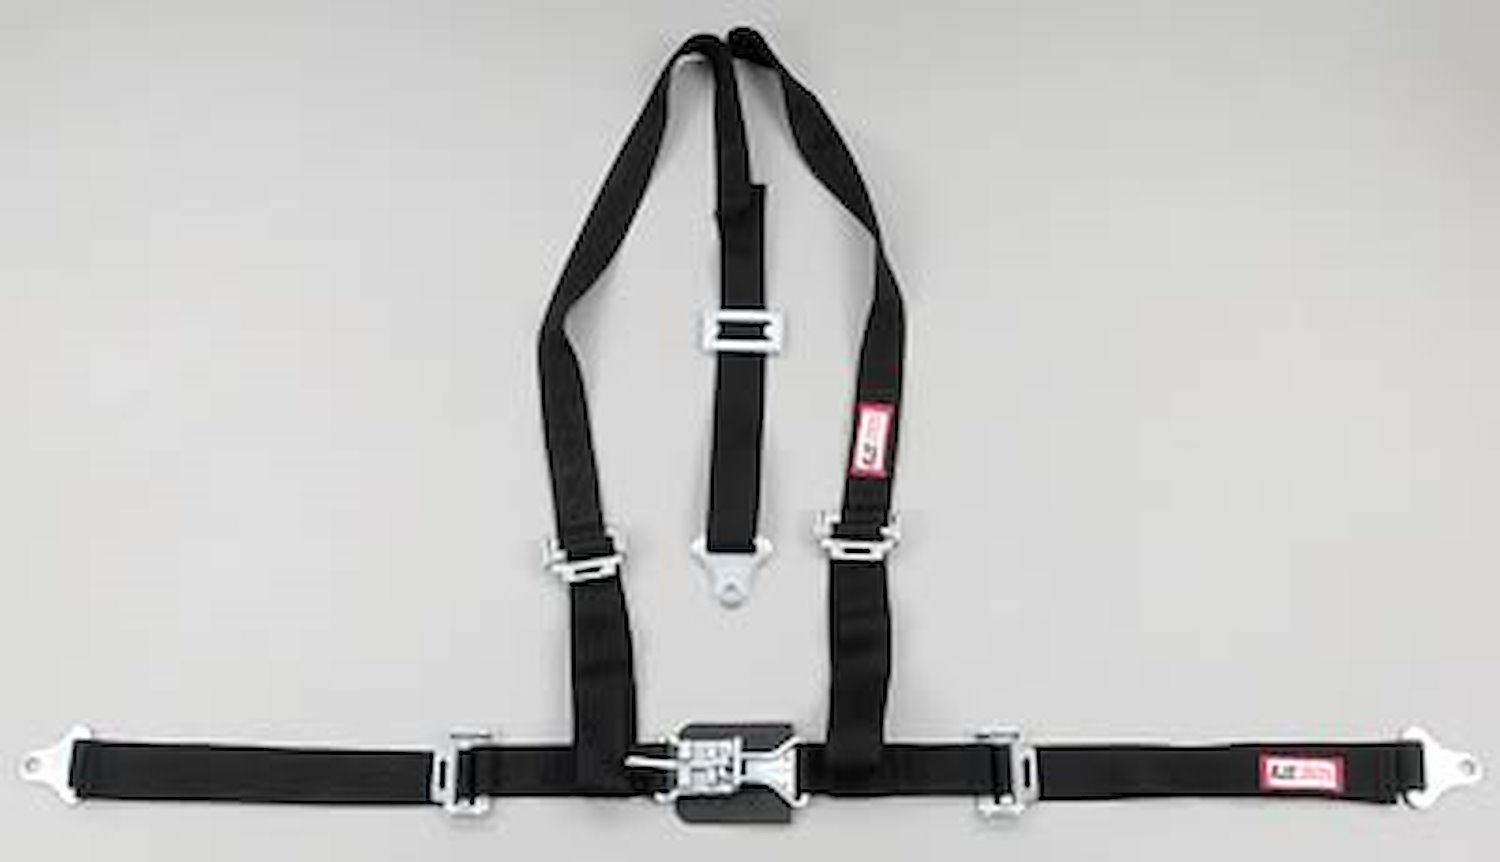 NON-SFI L&L HARNESS 3 PULL DOWN Lap Belt w/adjuster 2 S.H. Y FLOOR Mount w/STERNUM STRAP ALL WRAP ENDS BLUE